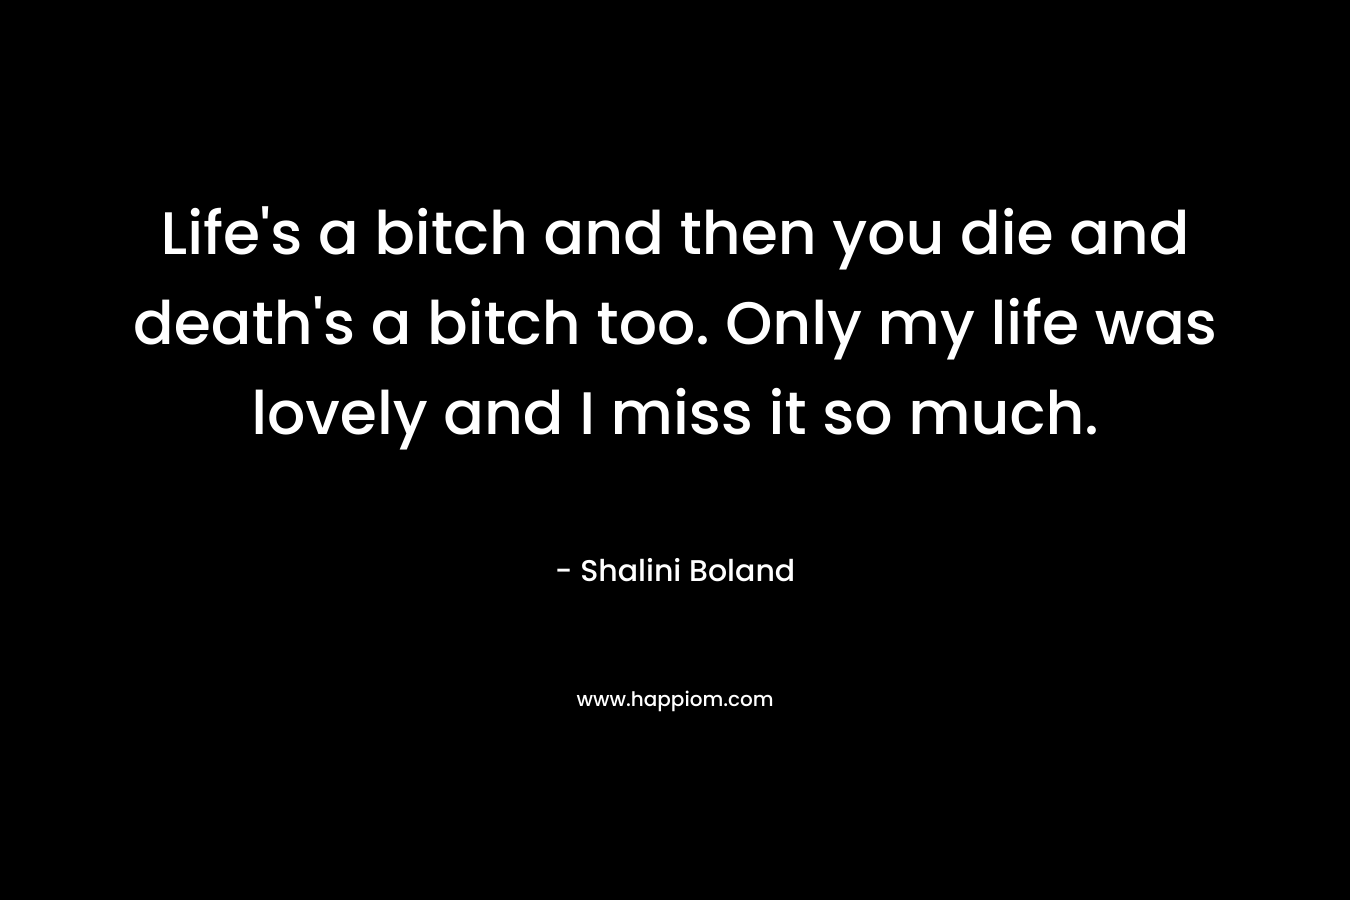 Life’s a bitch and then you die and death’s a bitch too. Only my life was lovely and I miss it so much. – Shalini Boland